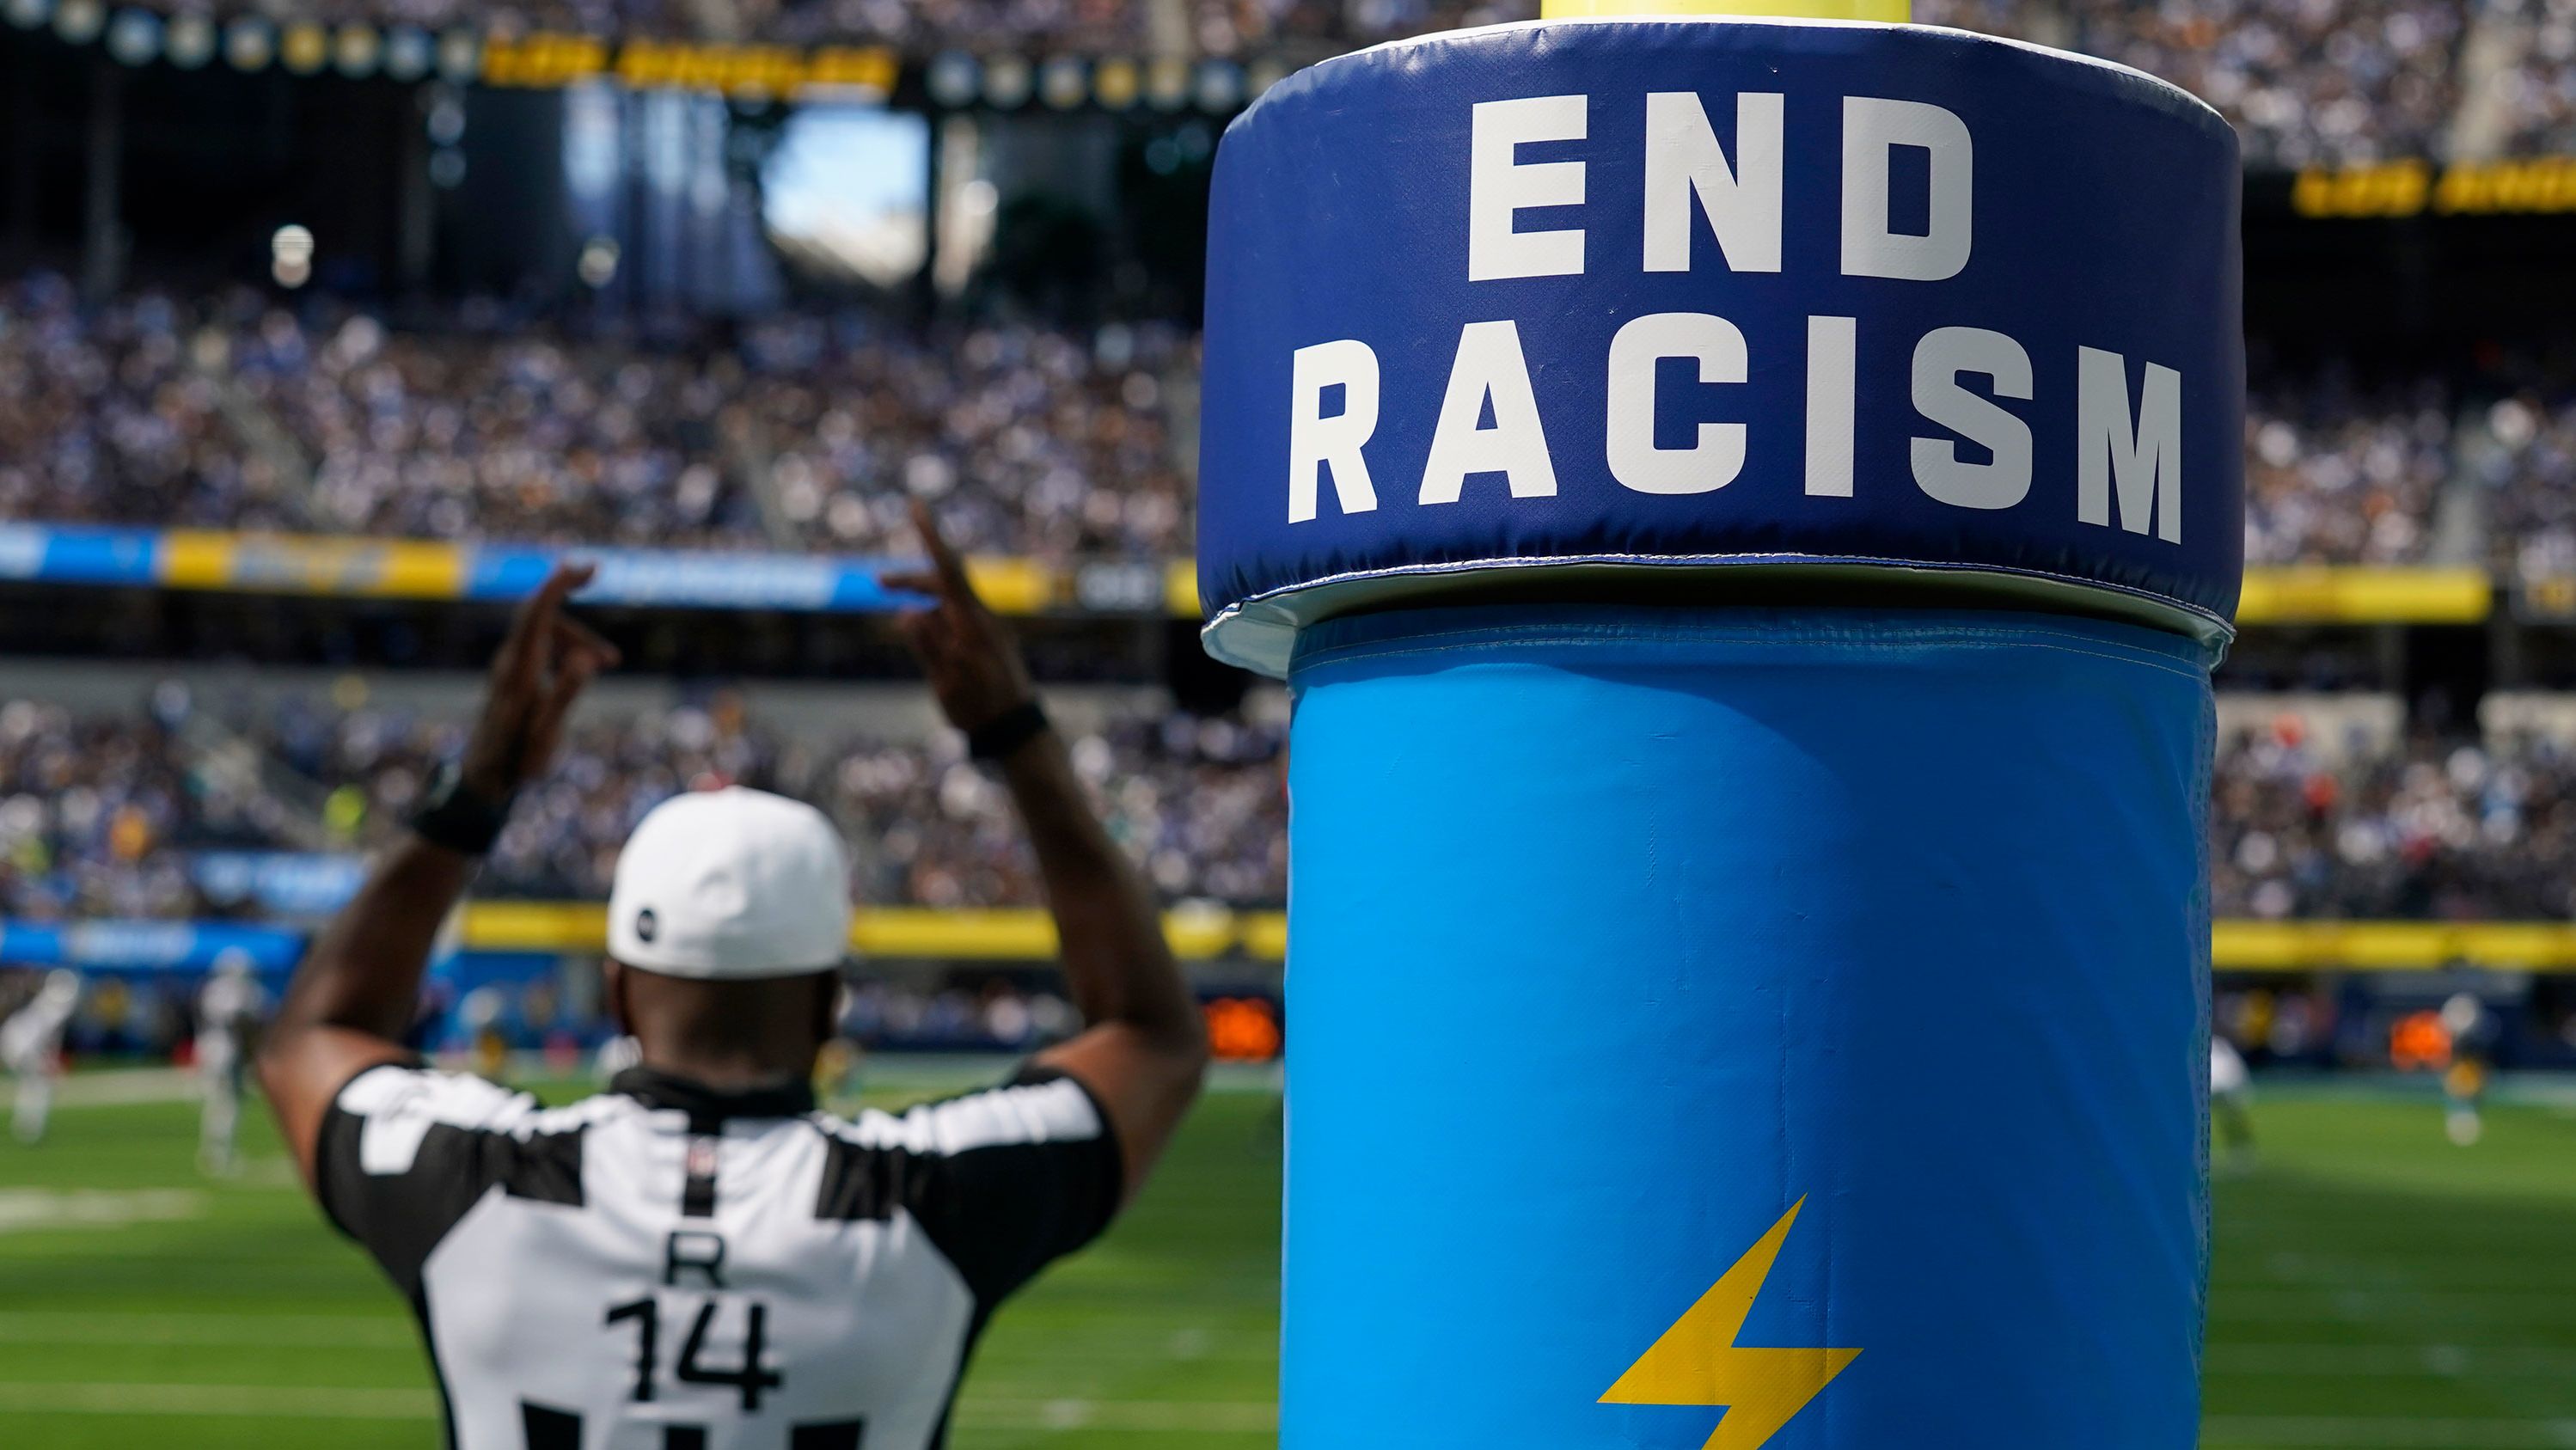 An "End Racism" sign is shown on a goal post during an NFL game on September 11, 2022.